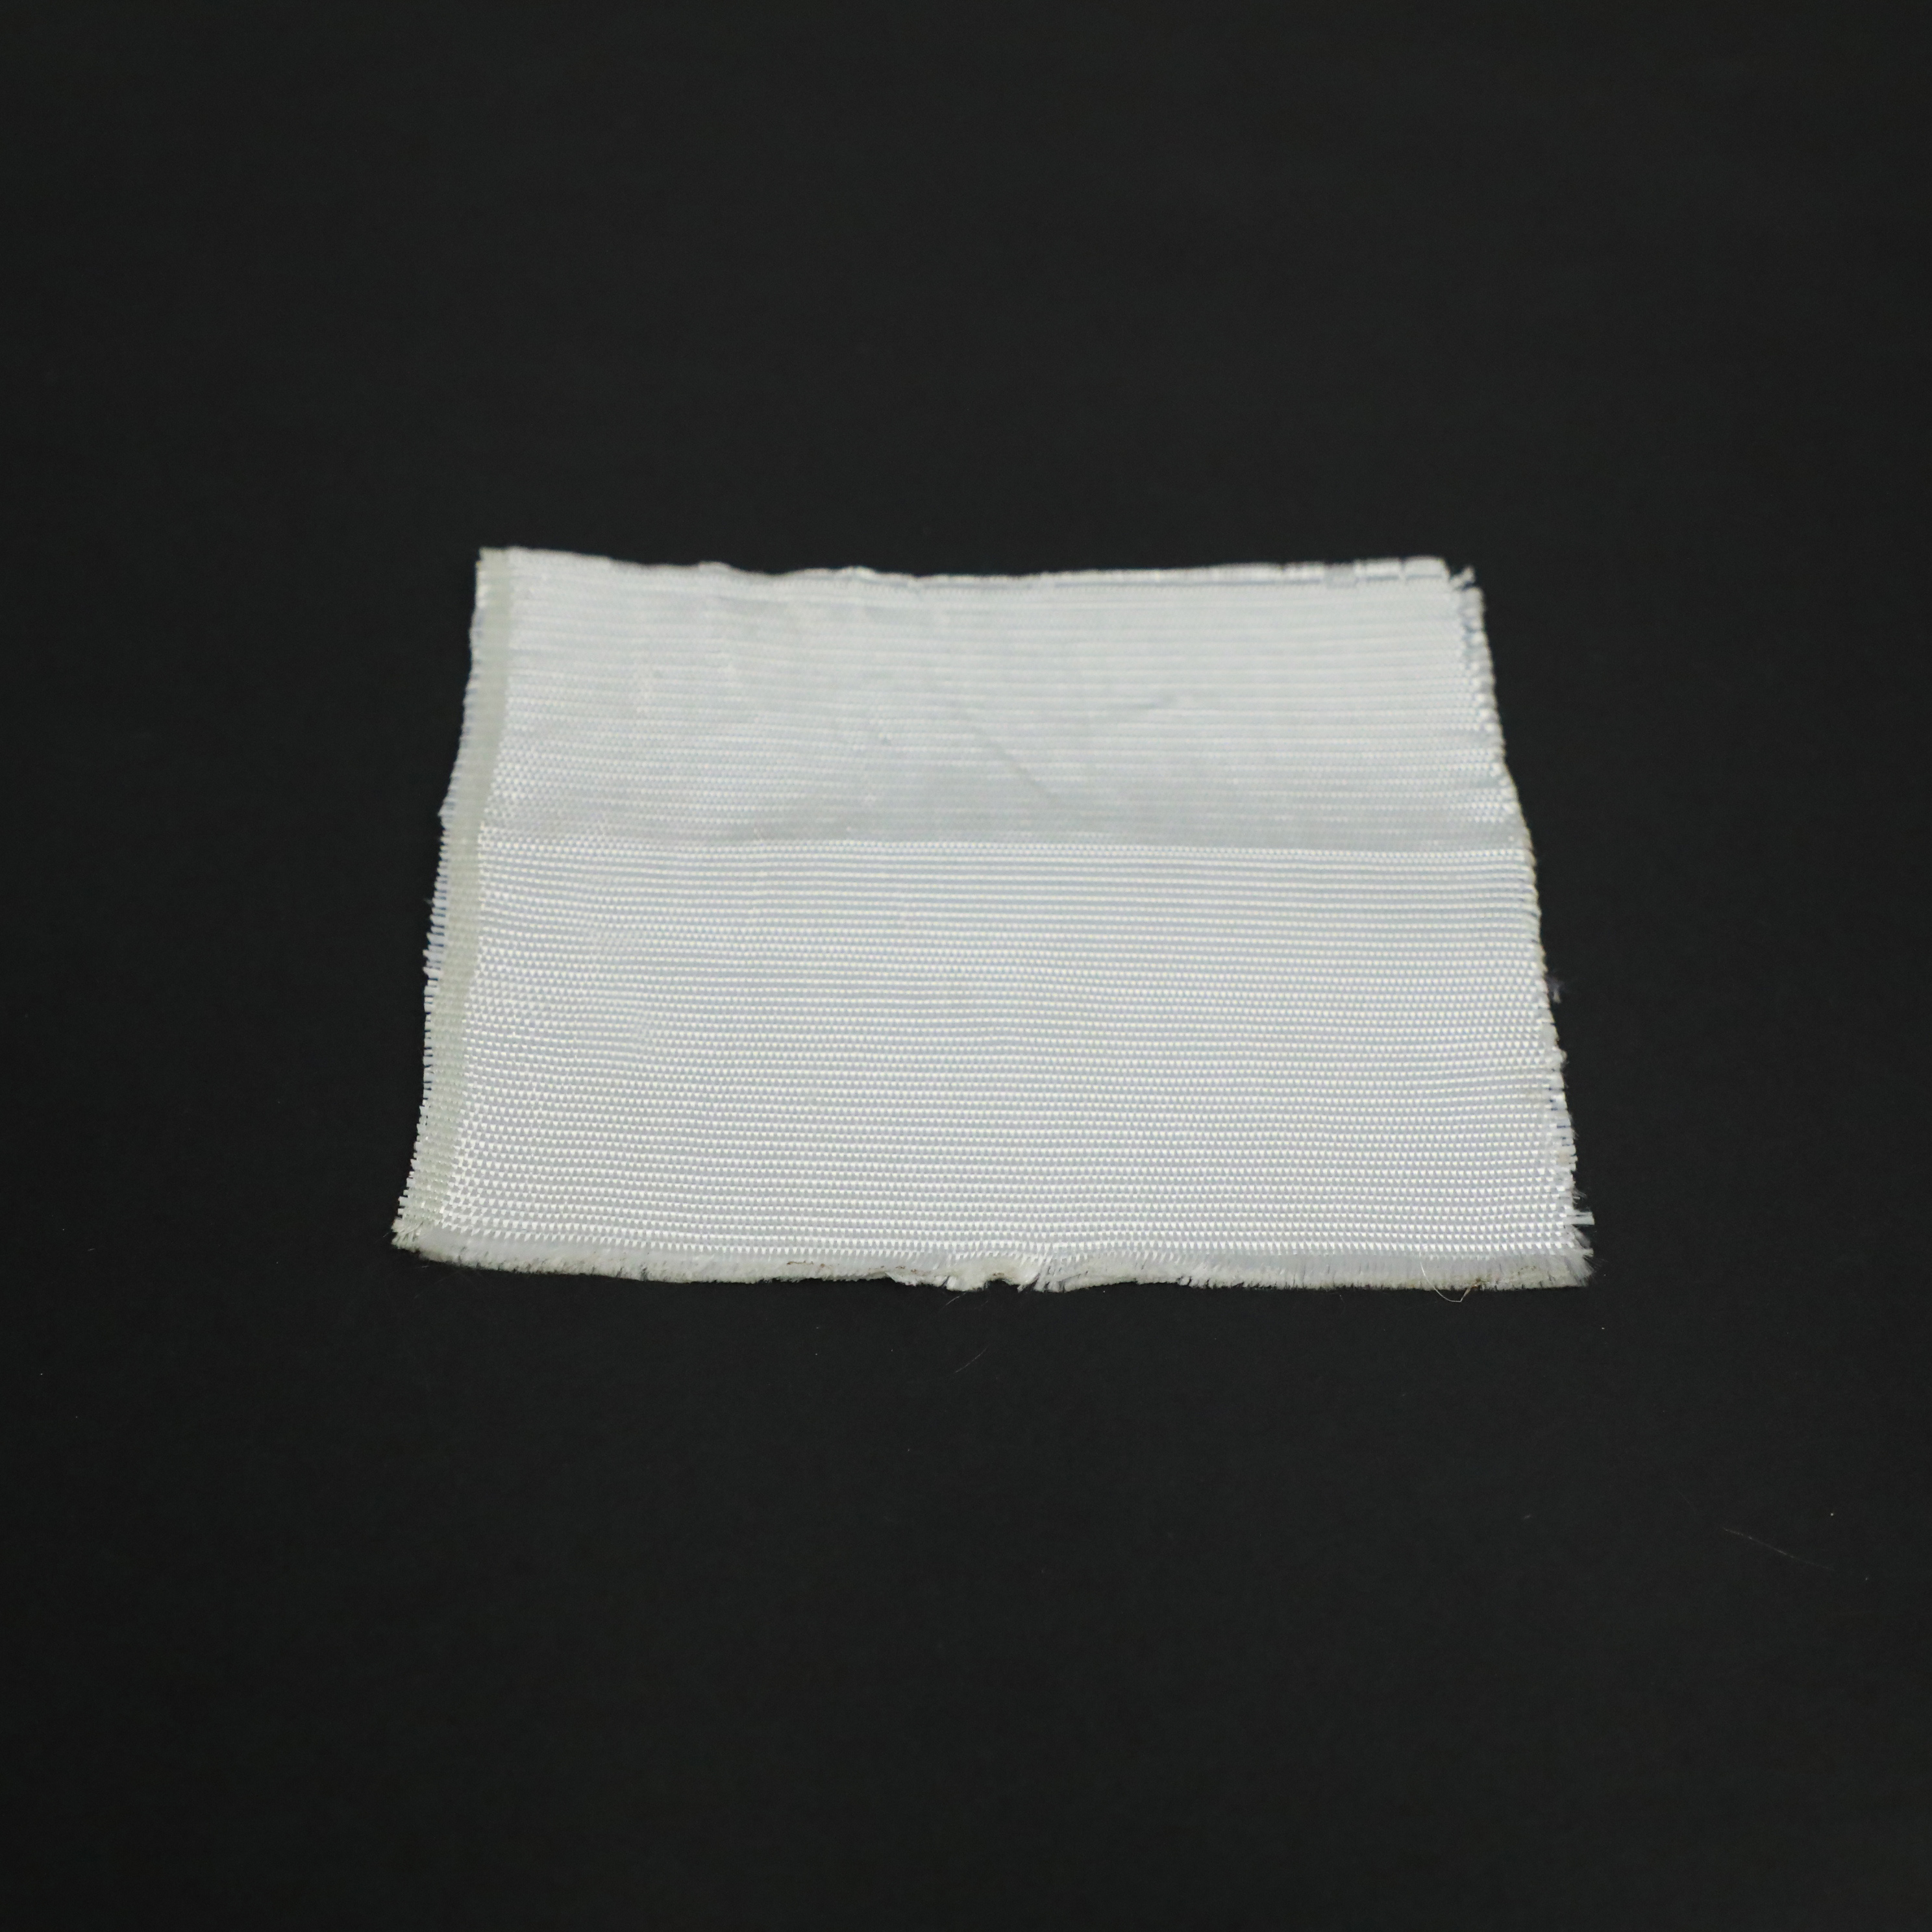 Fabric Geotextile Fabric for Driveway Woven Geotextile 